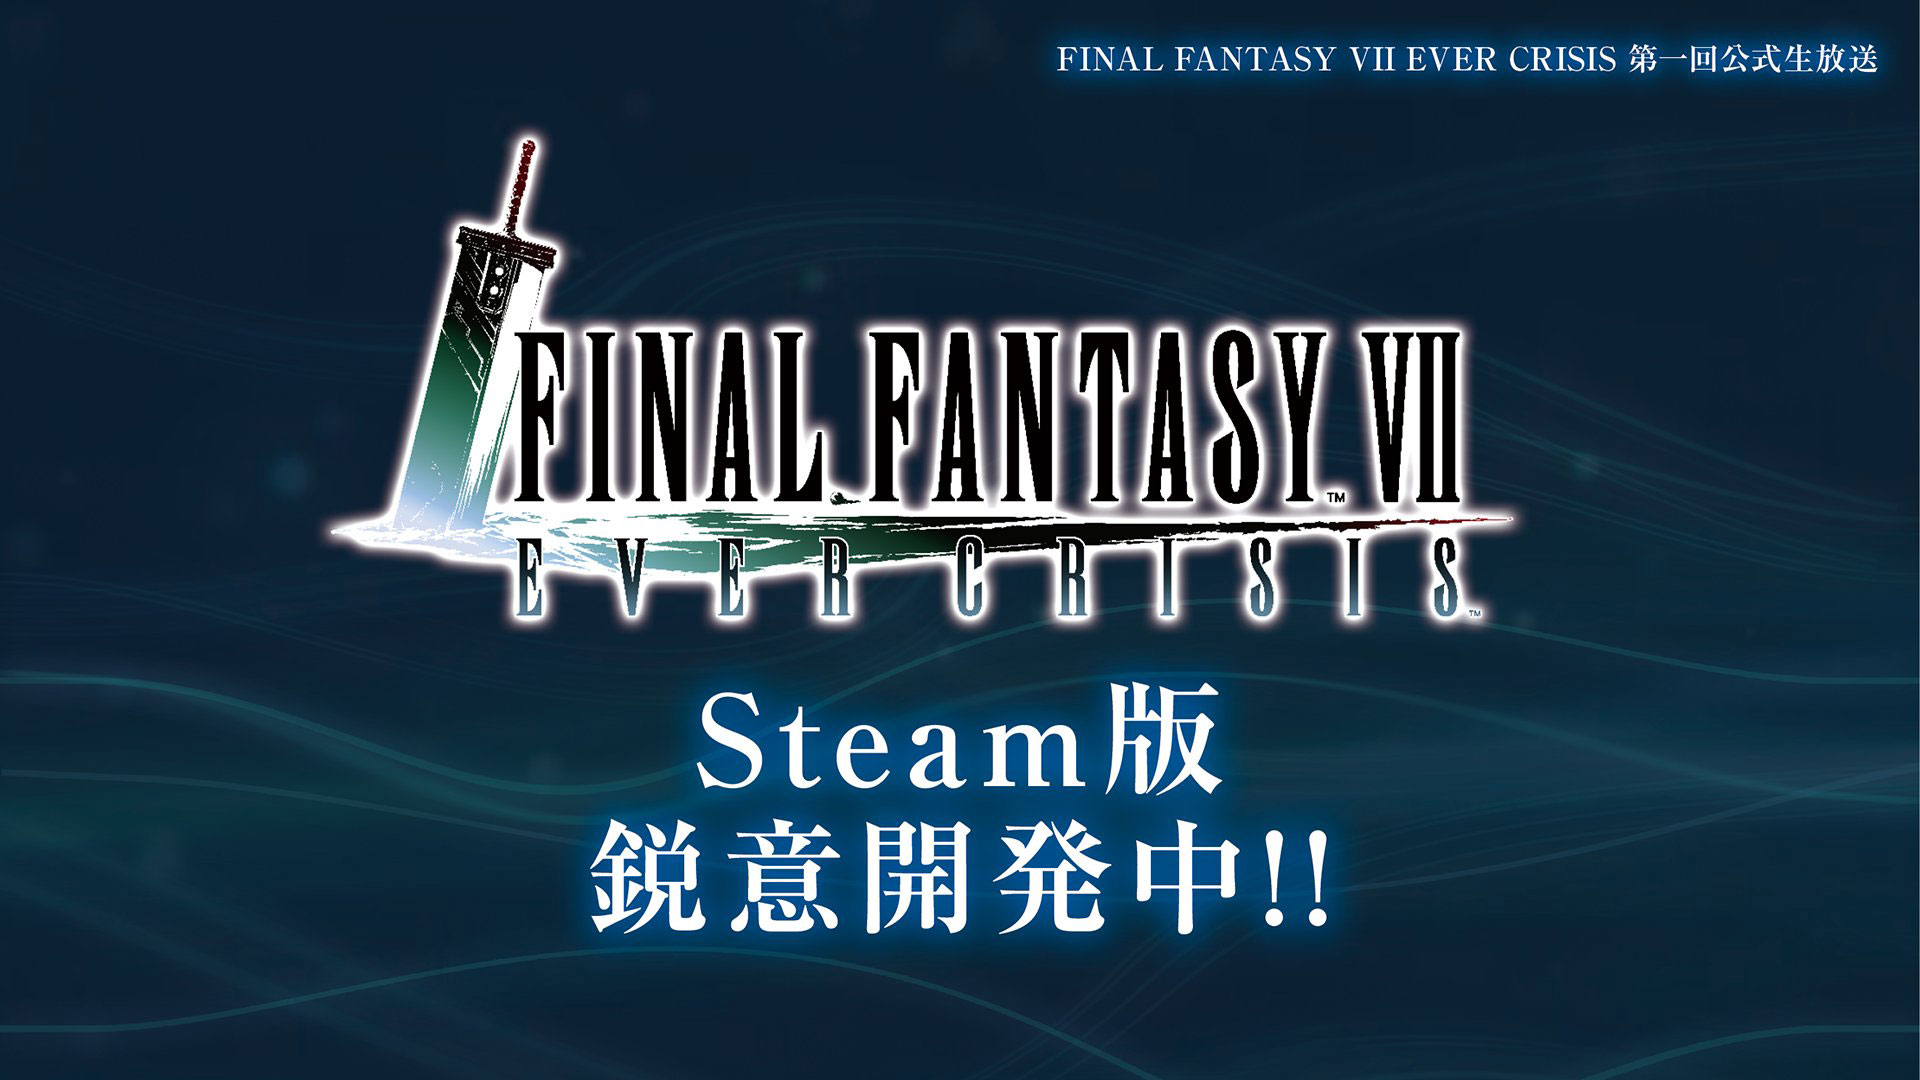 Mobile game Final Fantasy VII Ever Crisis is getting a PC version on Steam